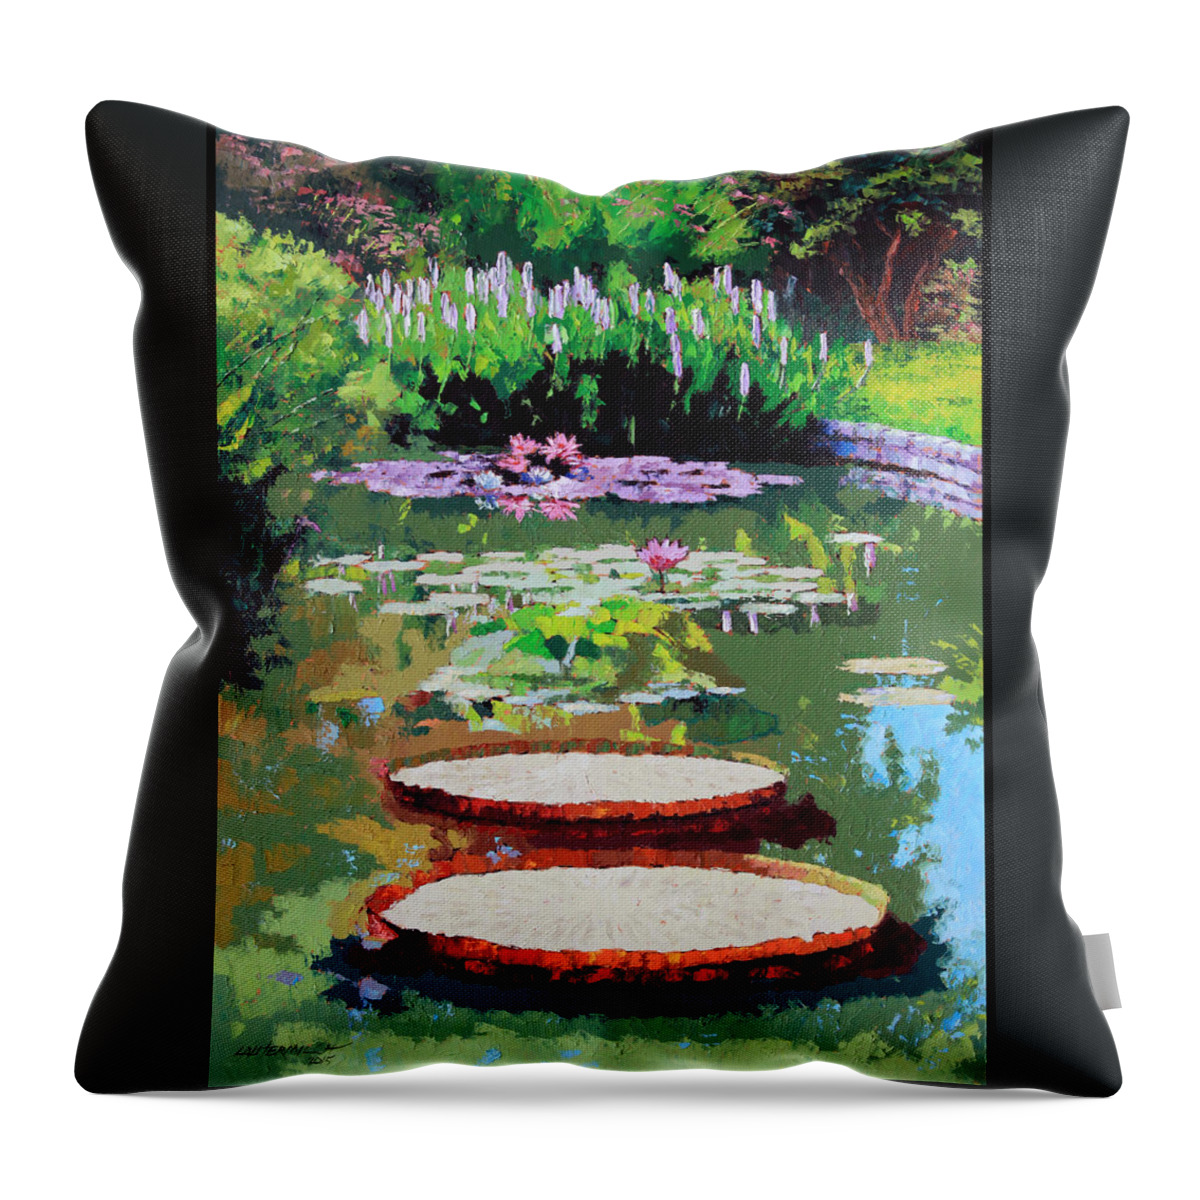 Garden Pond Throw Pillow featuring the painting Tower Grove Park by John Lautermilch